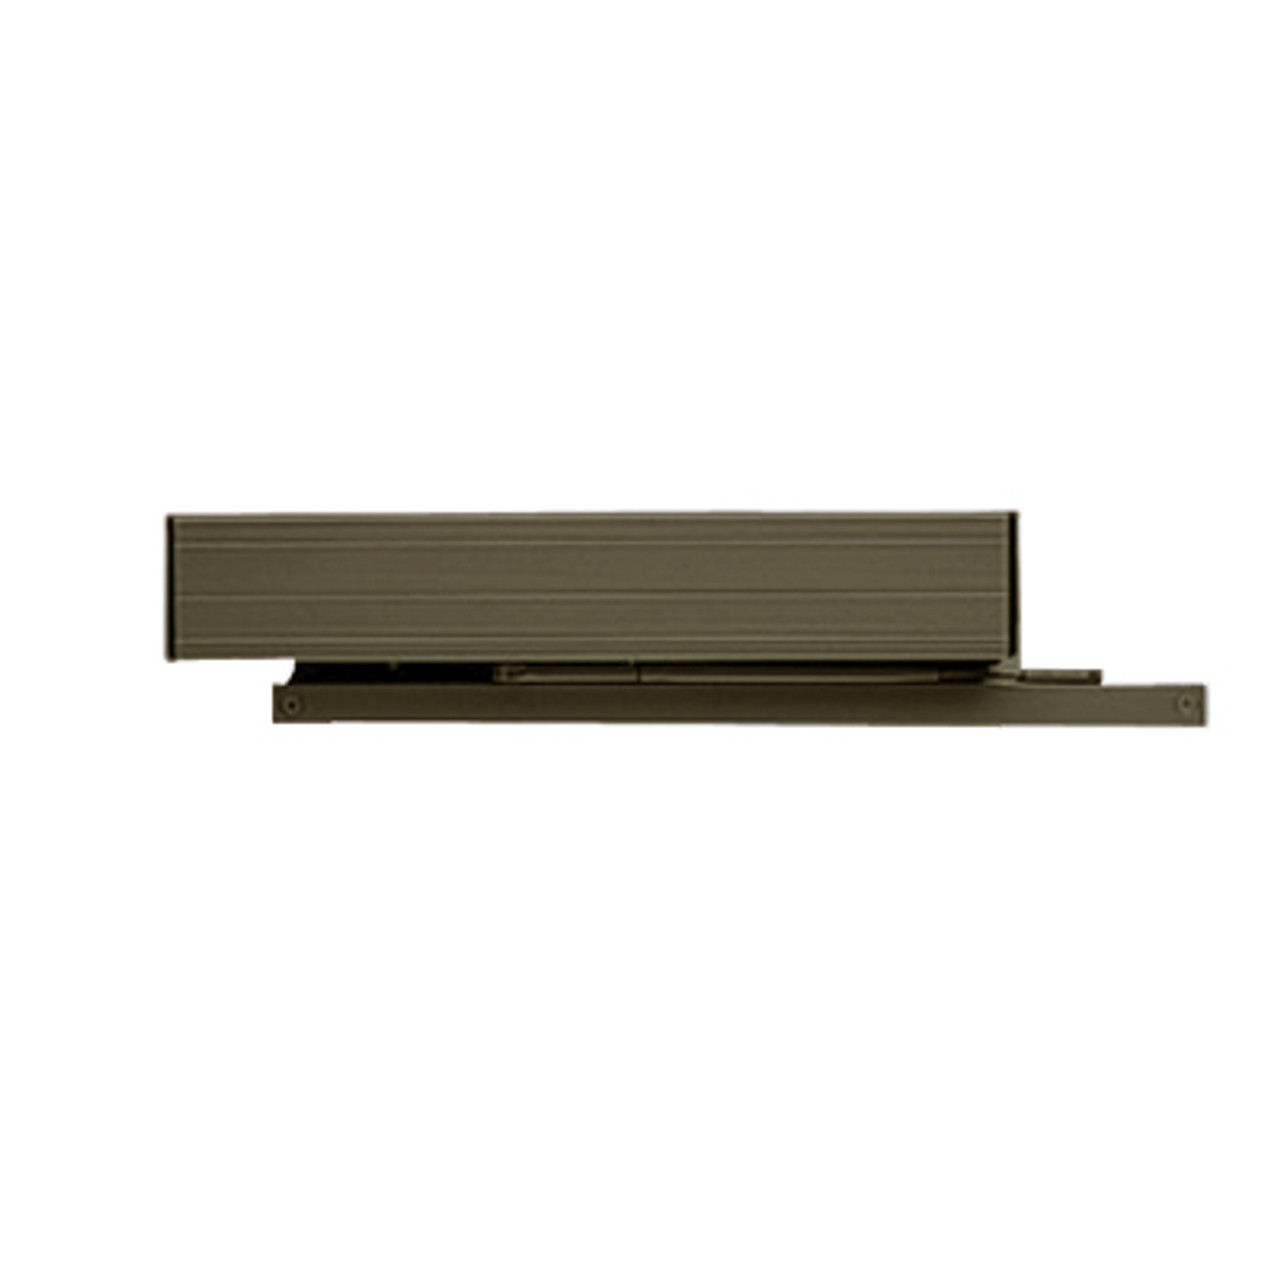 4822-LONG-US10B LCN Door Closer with Long Arm in Oil Rubbed Bronze Finish